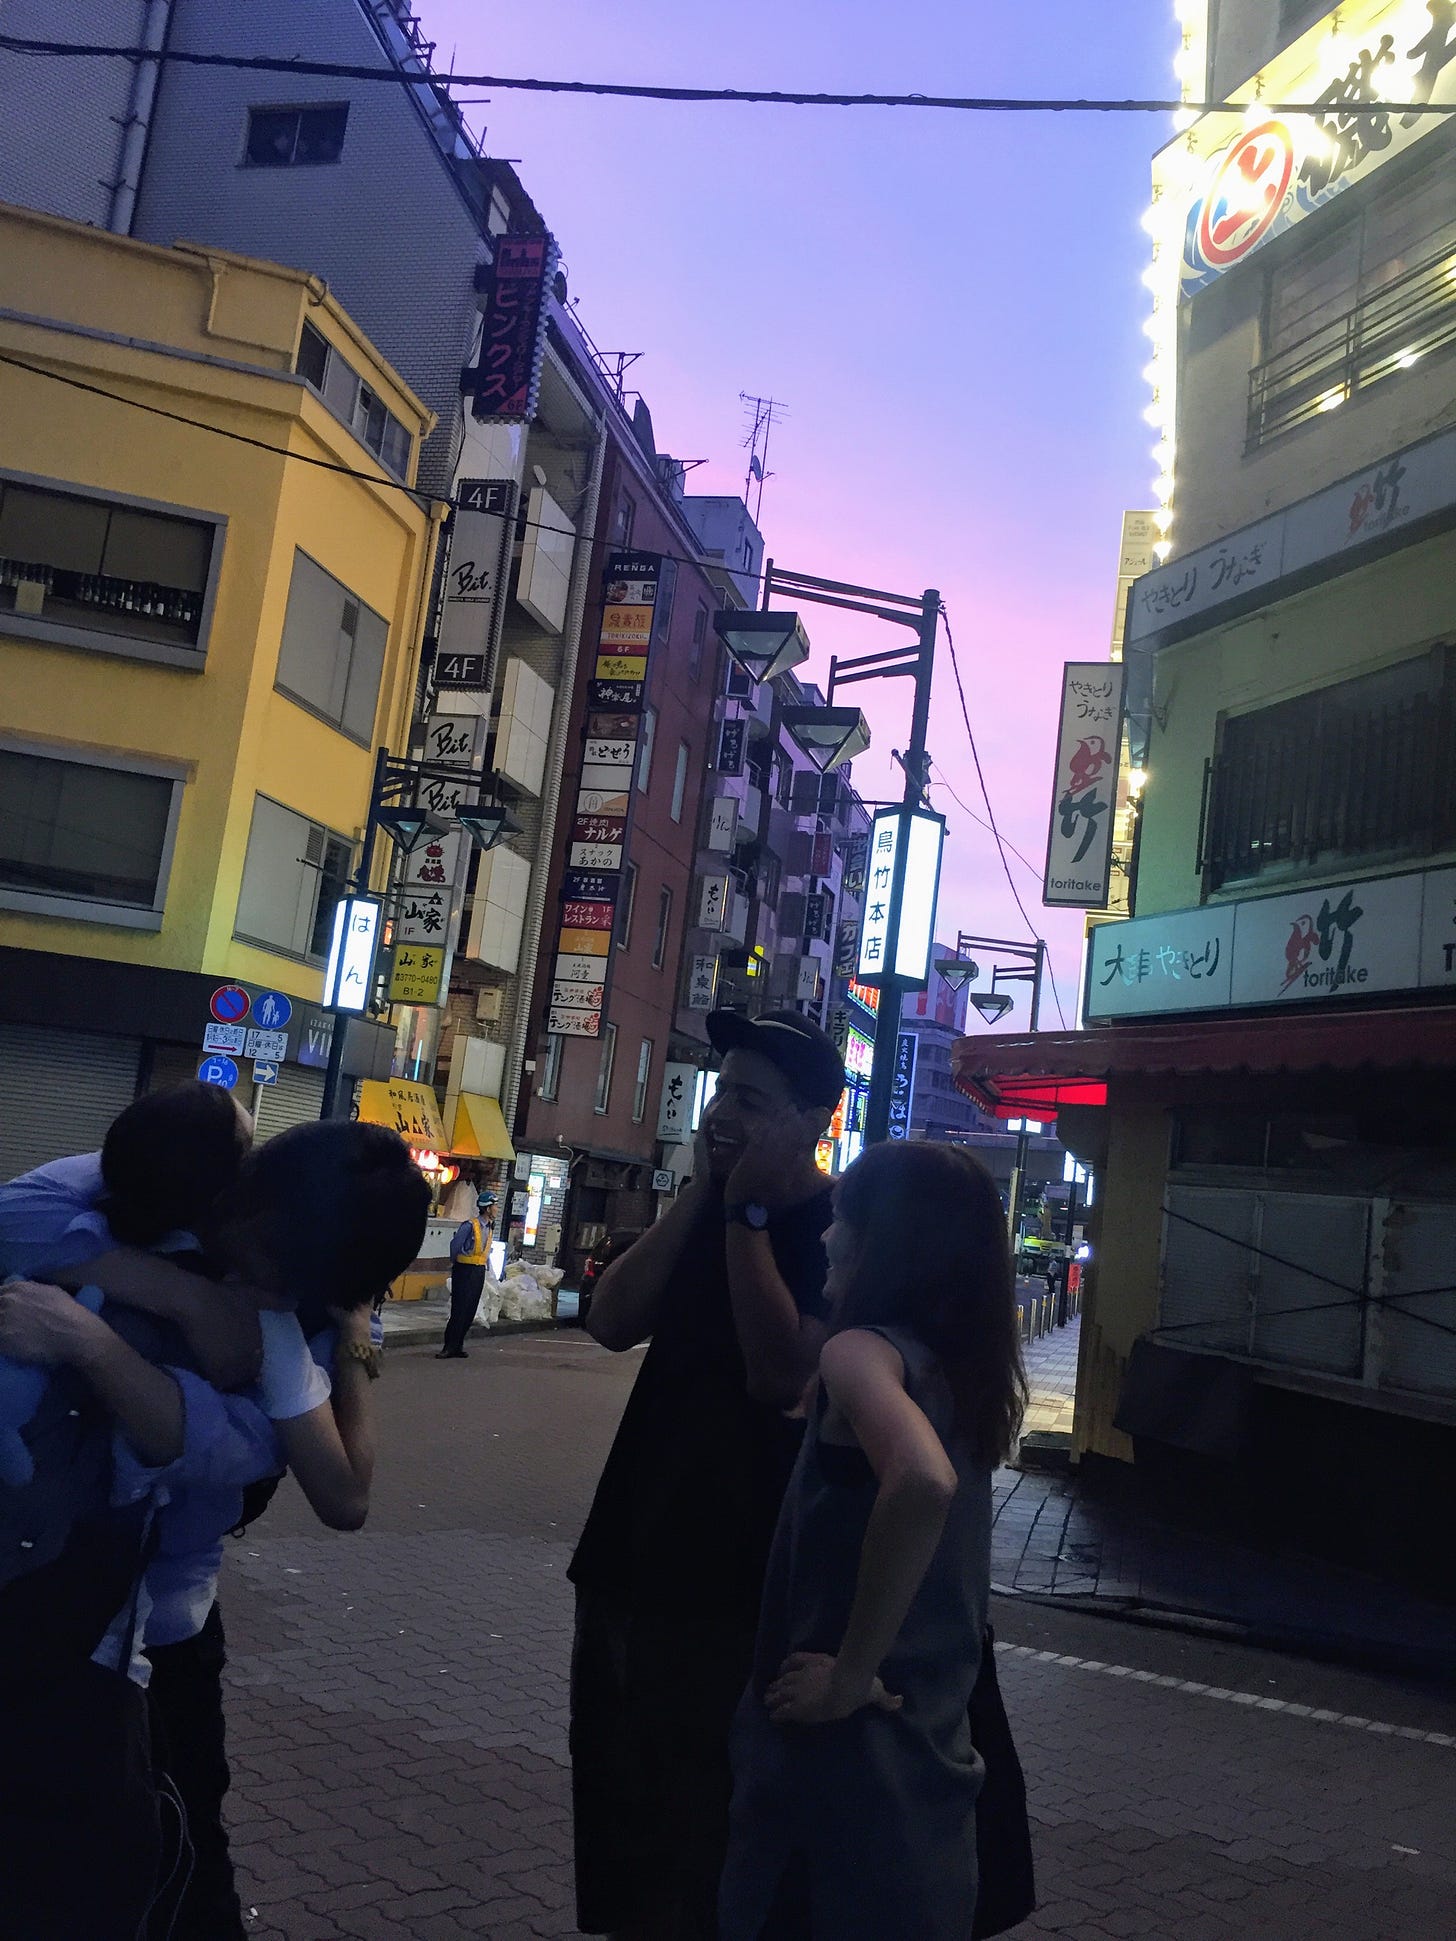 Photo of two people I'd met that night hugging, while two others look on. The sky is purple and pink, the street is lined with Japanese signs.